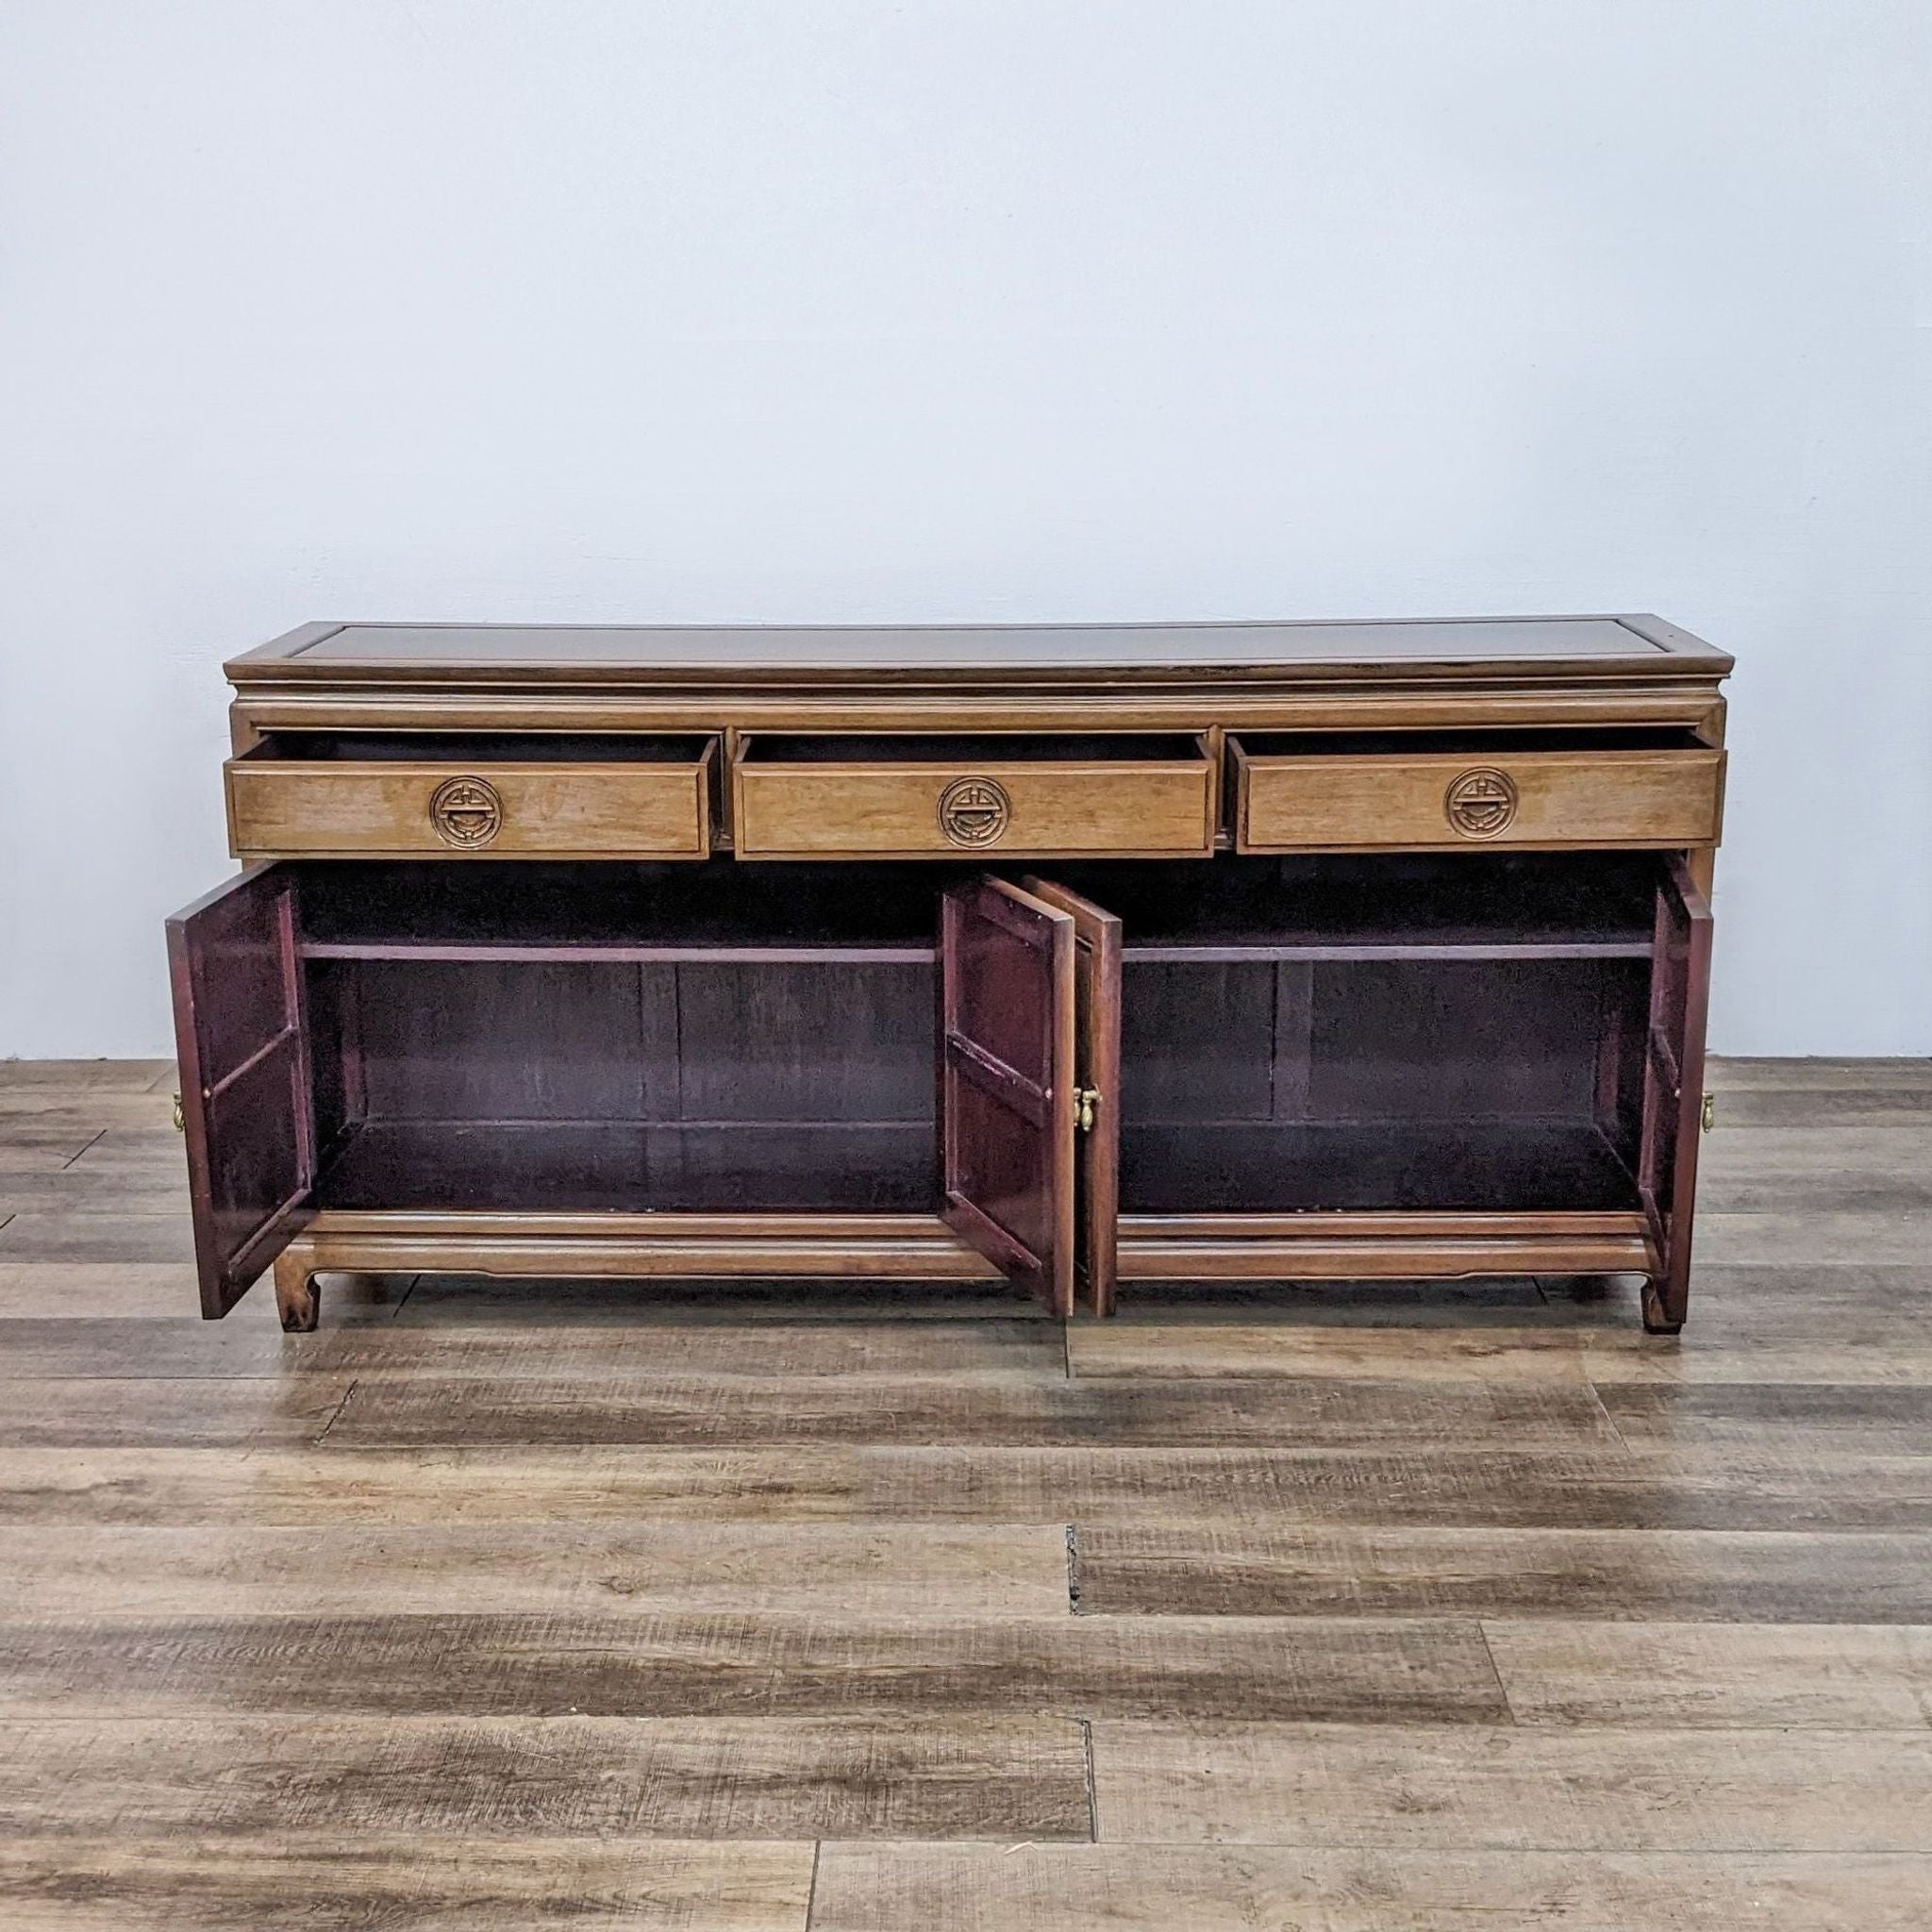 Reperch sideboard with Long Life design, showing open cupboards and drawers, displaying interior shelves.